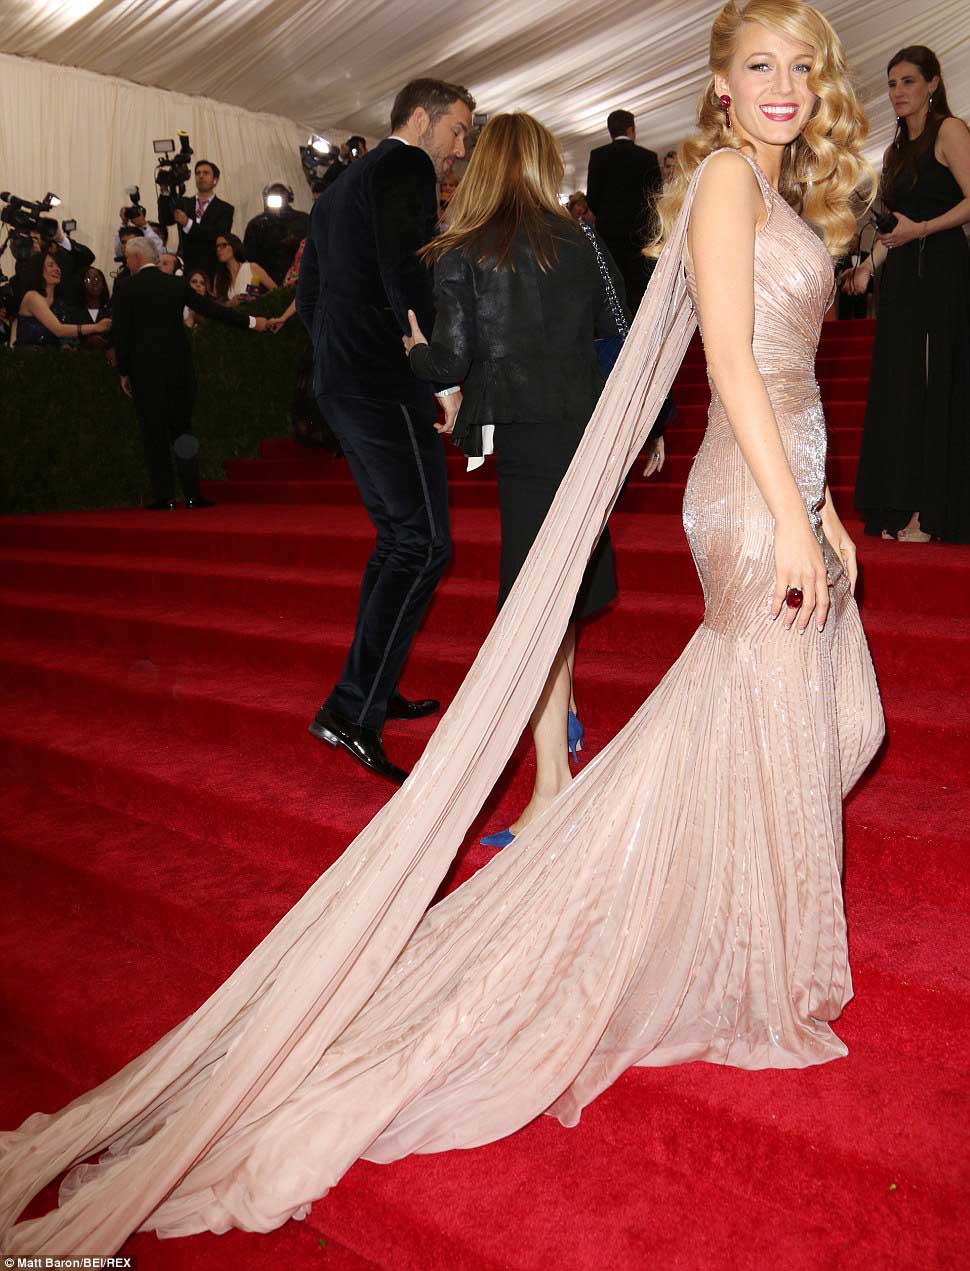 Blake Lively wears Gucci to the Charles James' themed Met Ball 2014.